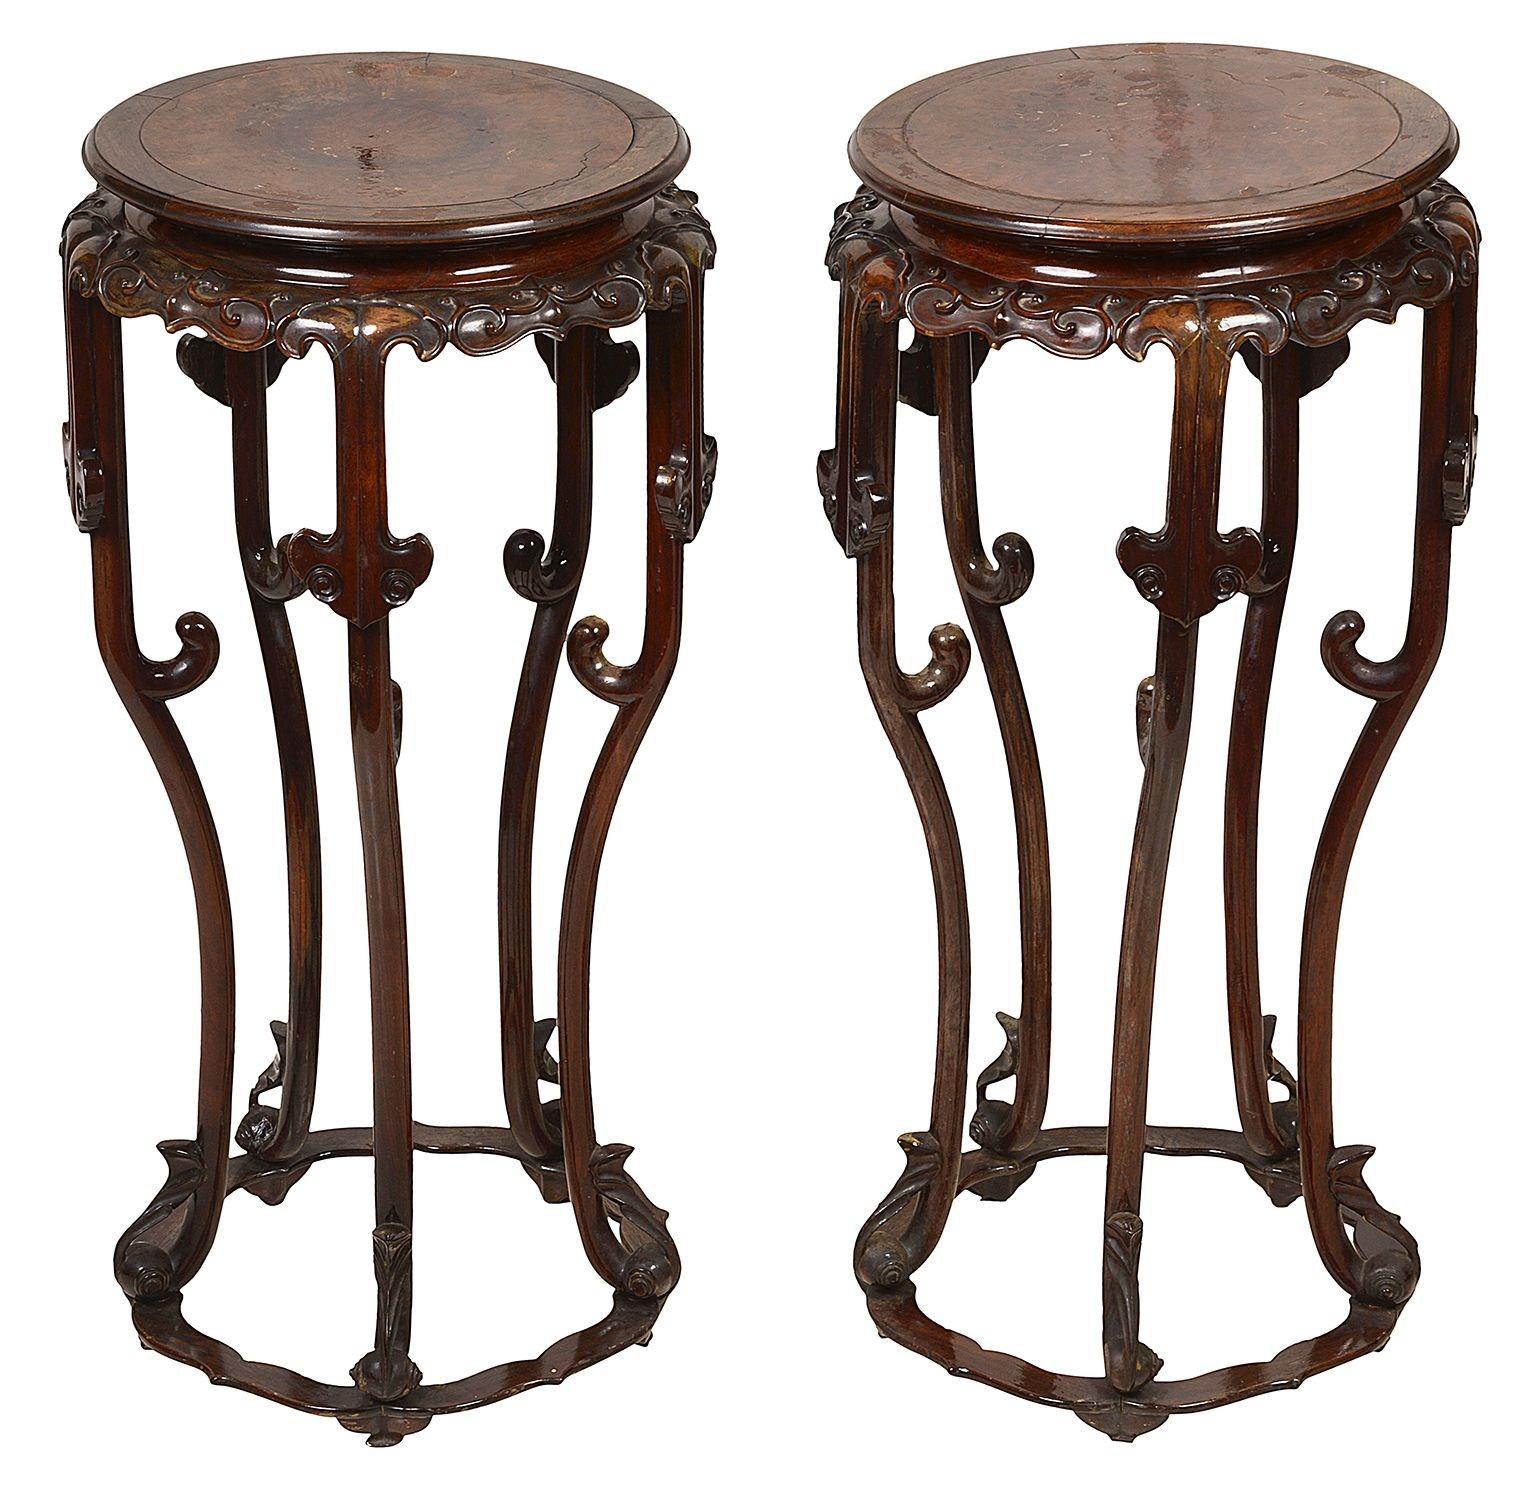 A very good quality pair of Chinese hardwood, hand carved stands, each with inset burr wood panels to the top, scrolling blind fretwork to the frieze, raised on four elegant shaped supports, united by a stretcher below.
Batch 68 1/2cmc 58148